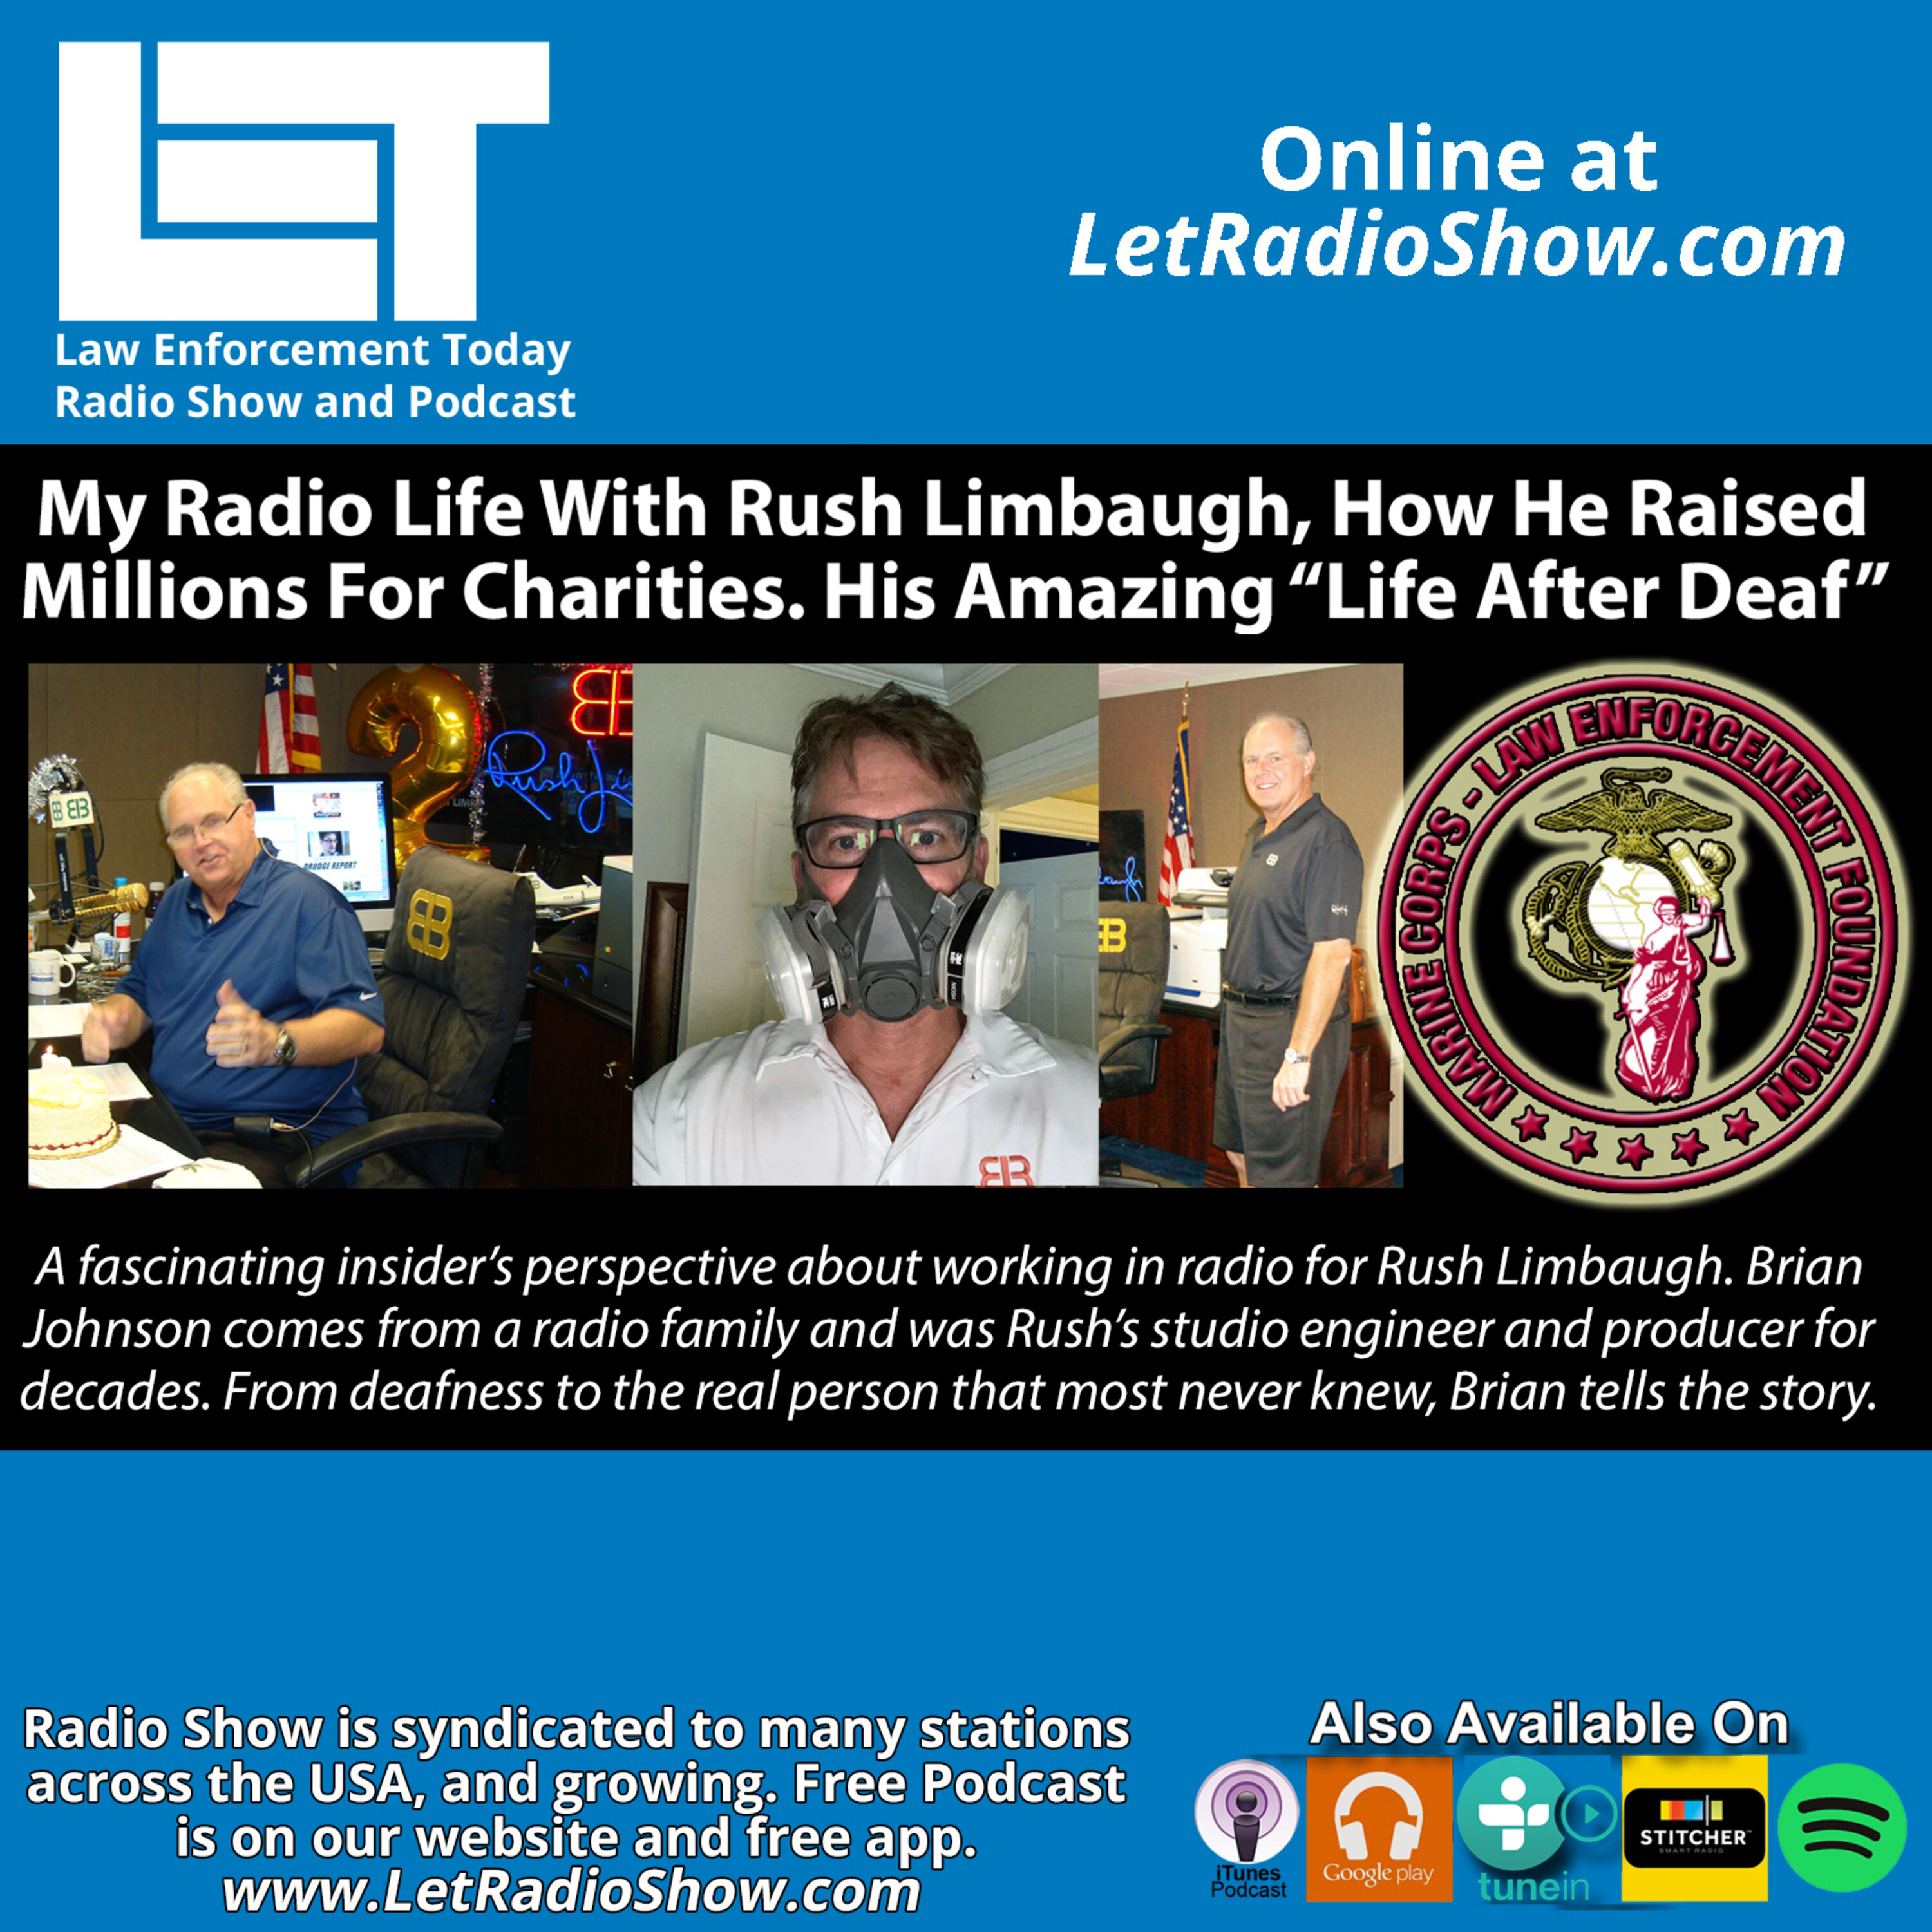 S6E90: My Radio Life With Rush Limbaugh, How He Raised Millions For Charities. His Amazing “Life After Deaf”. Image